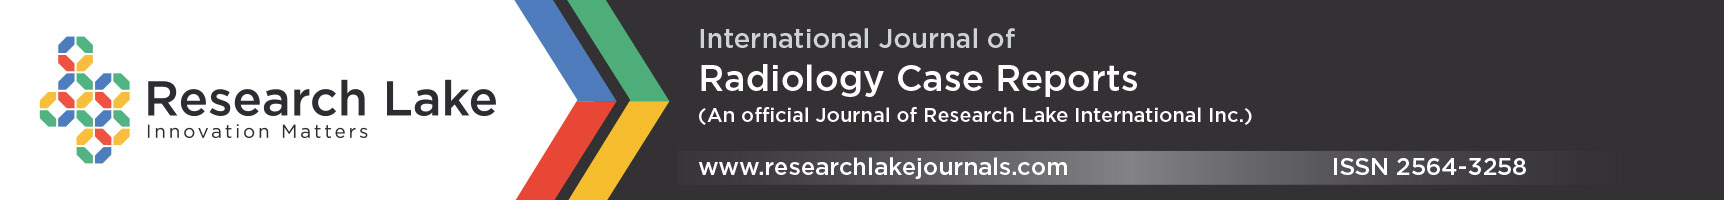 International Journal of Radiology Case Reports